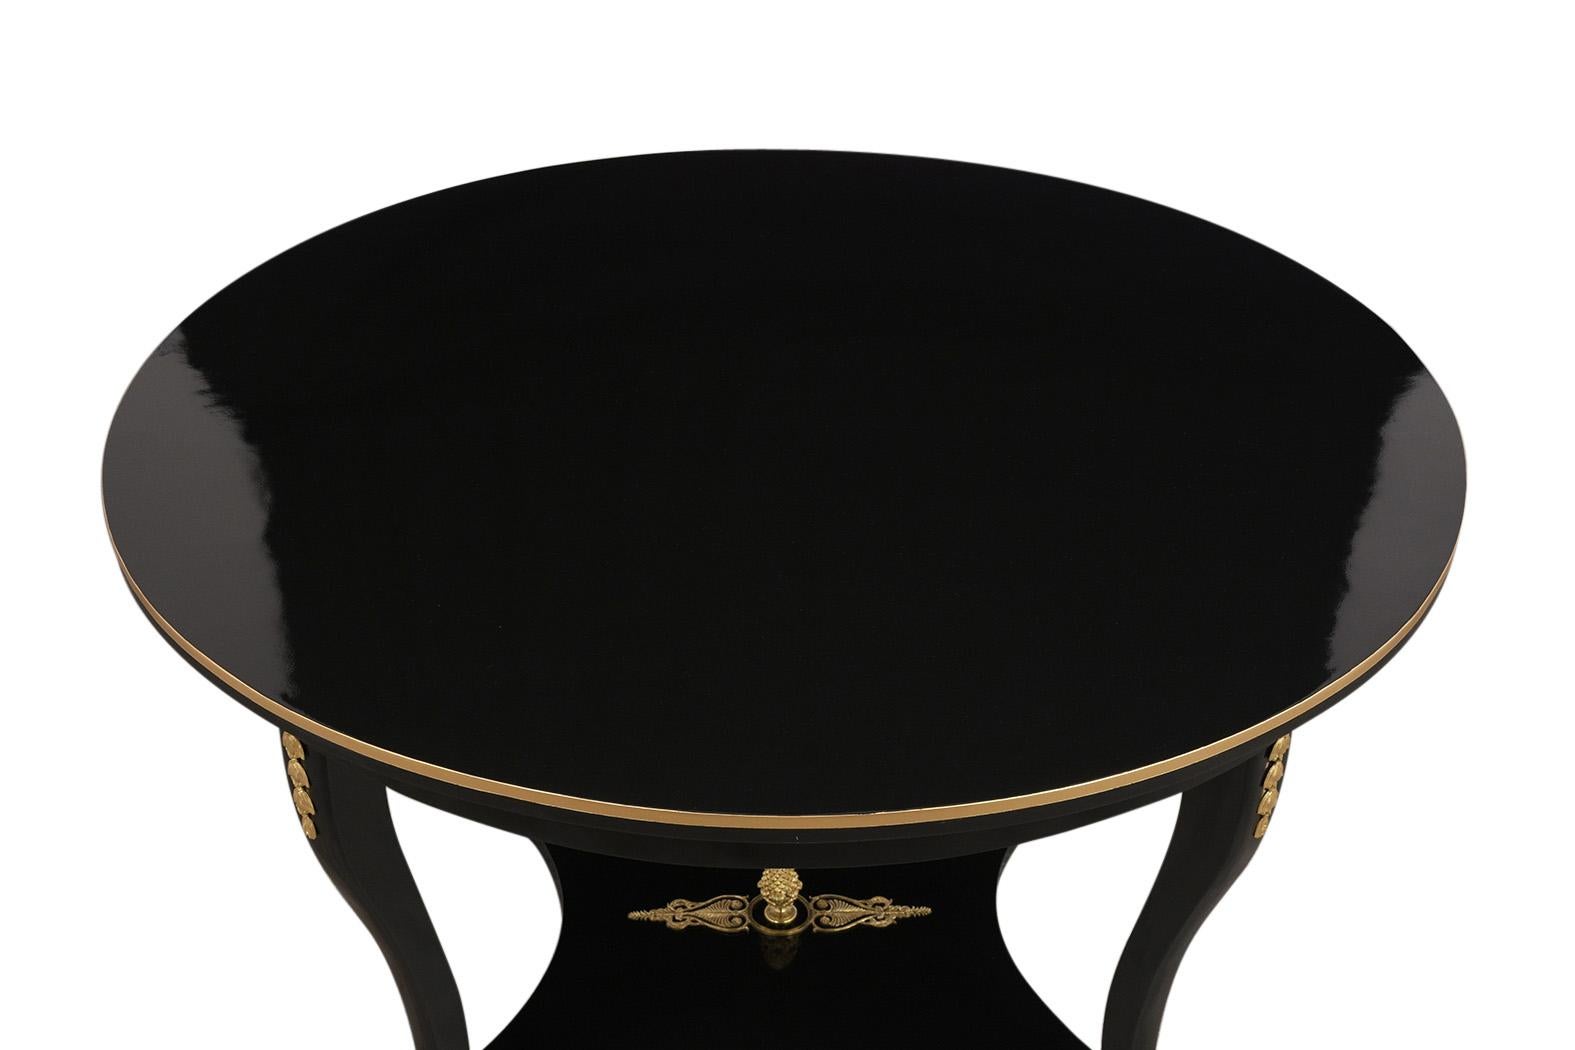 This Late 19th-Century Grand Regency Center Table has been newly restored and is made out of mahogany wood and has a newly ebonized lacquered finish with gold trim details. This table features beautiful brass decorations along the side, center,